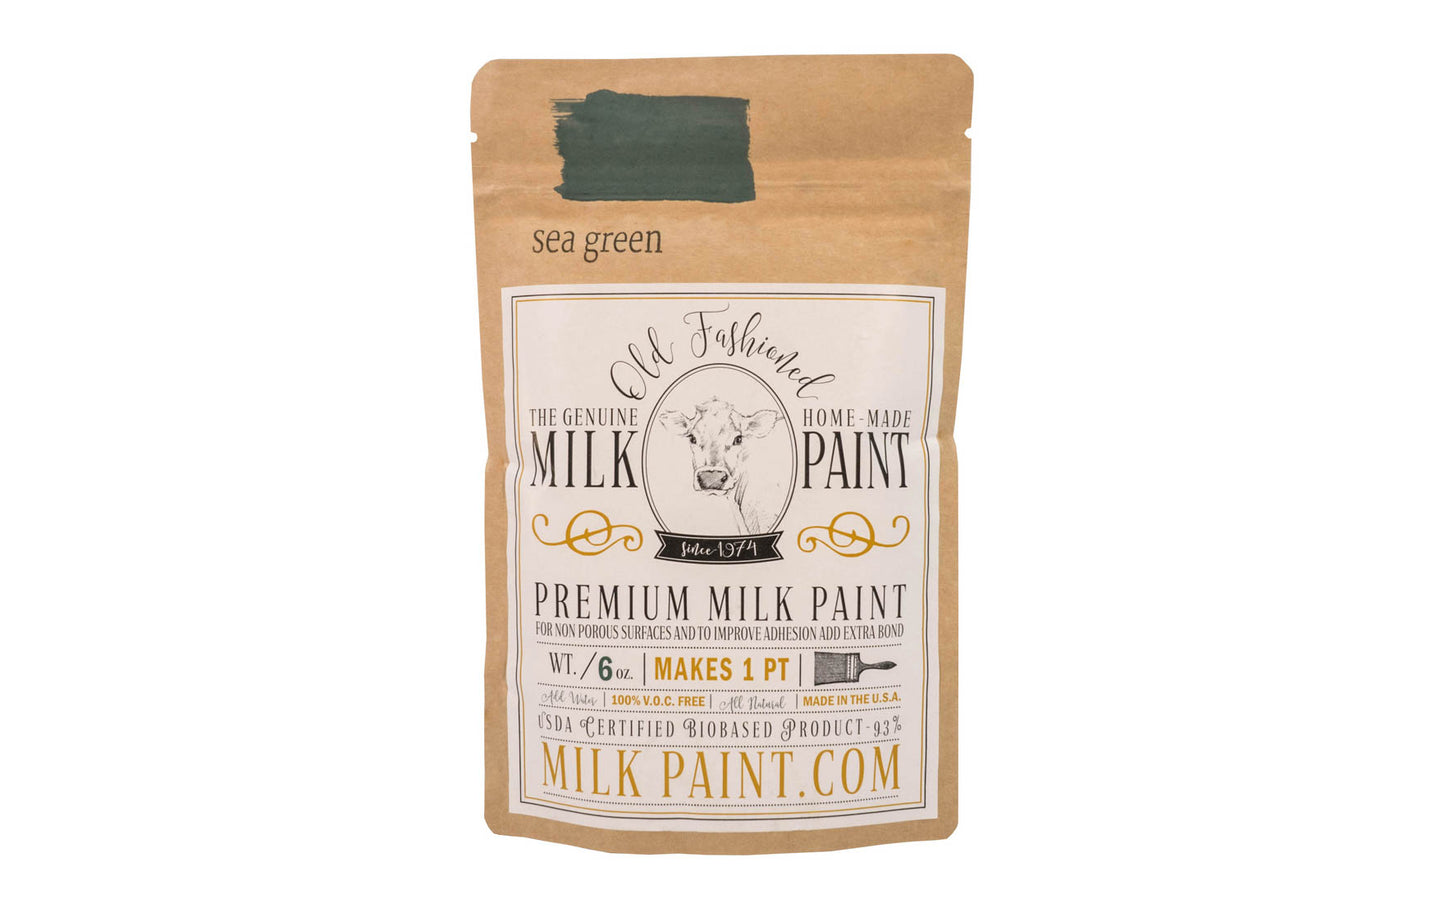 This Milk Paint color is "Sea Green" - Blue/green tone. Comes in a powder form, you can control how thick/thin you mix the paint. Use it as you would regular paint, thinner for a wash/stain or thicker to create texture. Environmentally safe, non-toxic & is food safe. 100% VOC free. Powder Paint